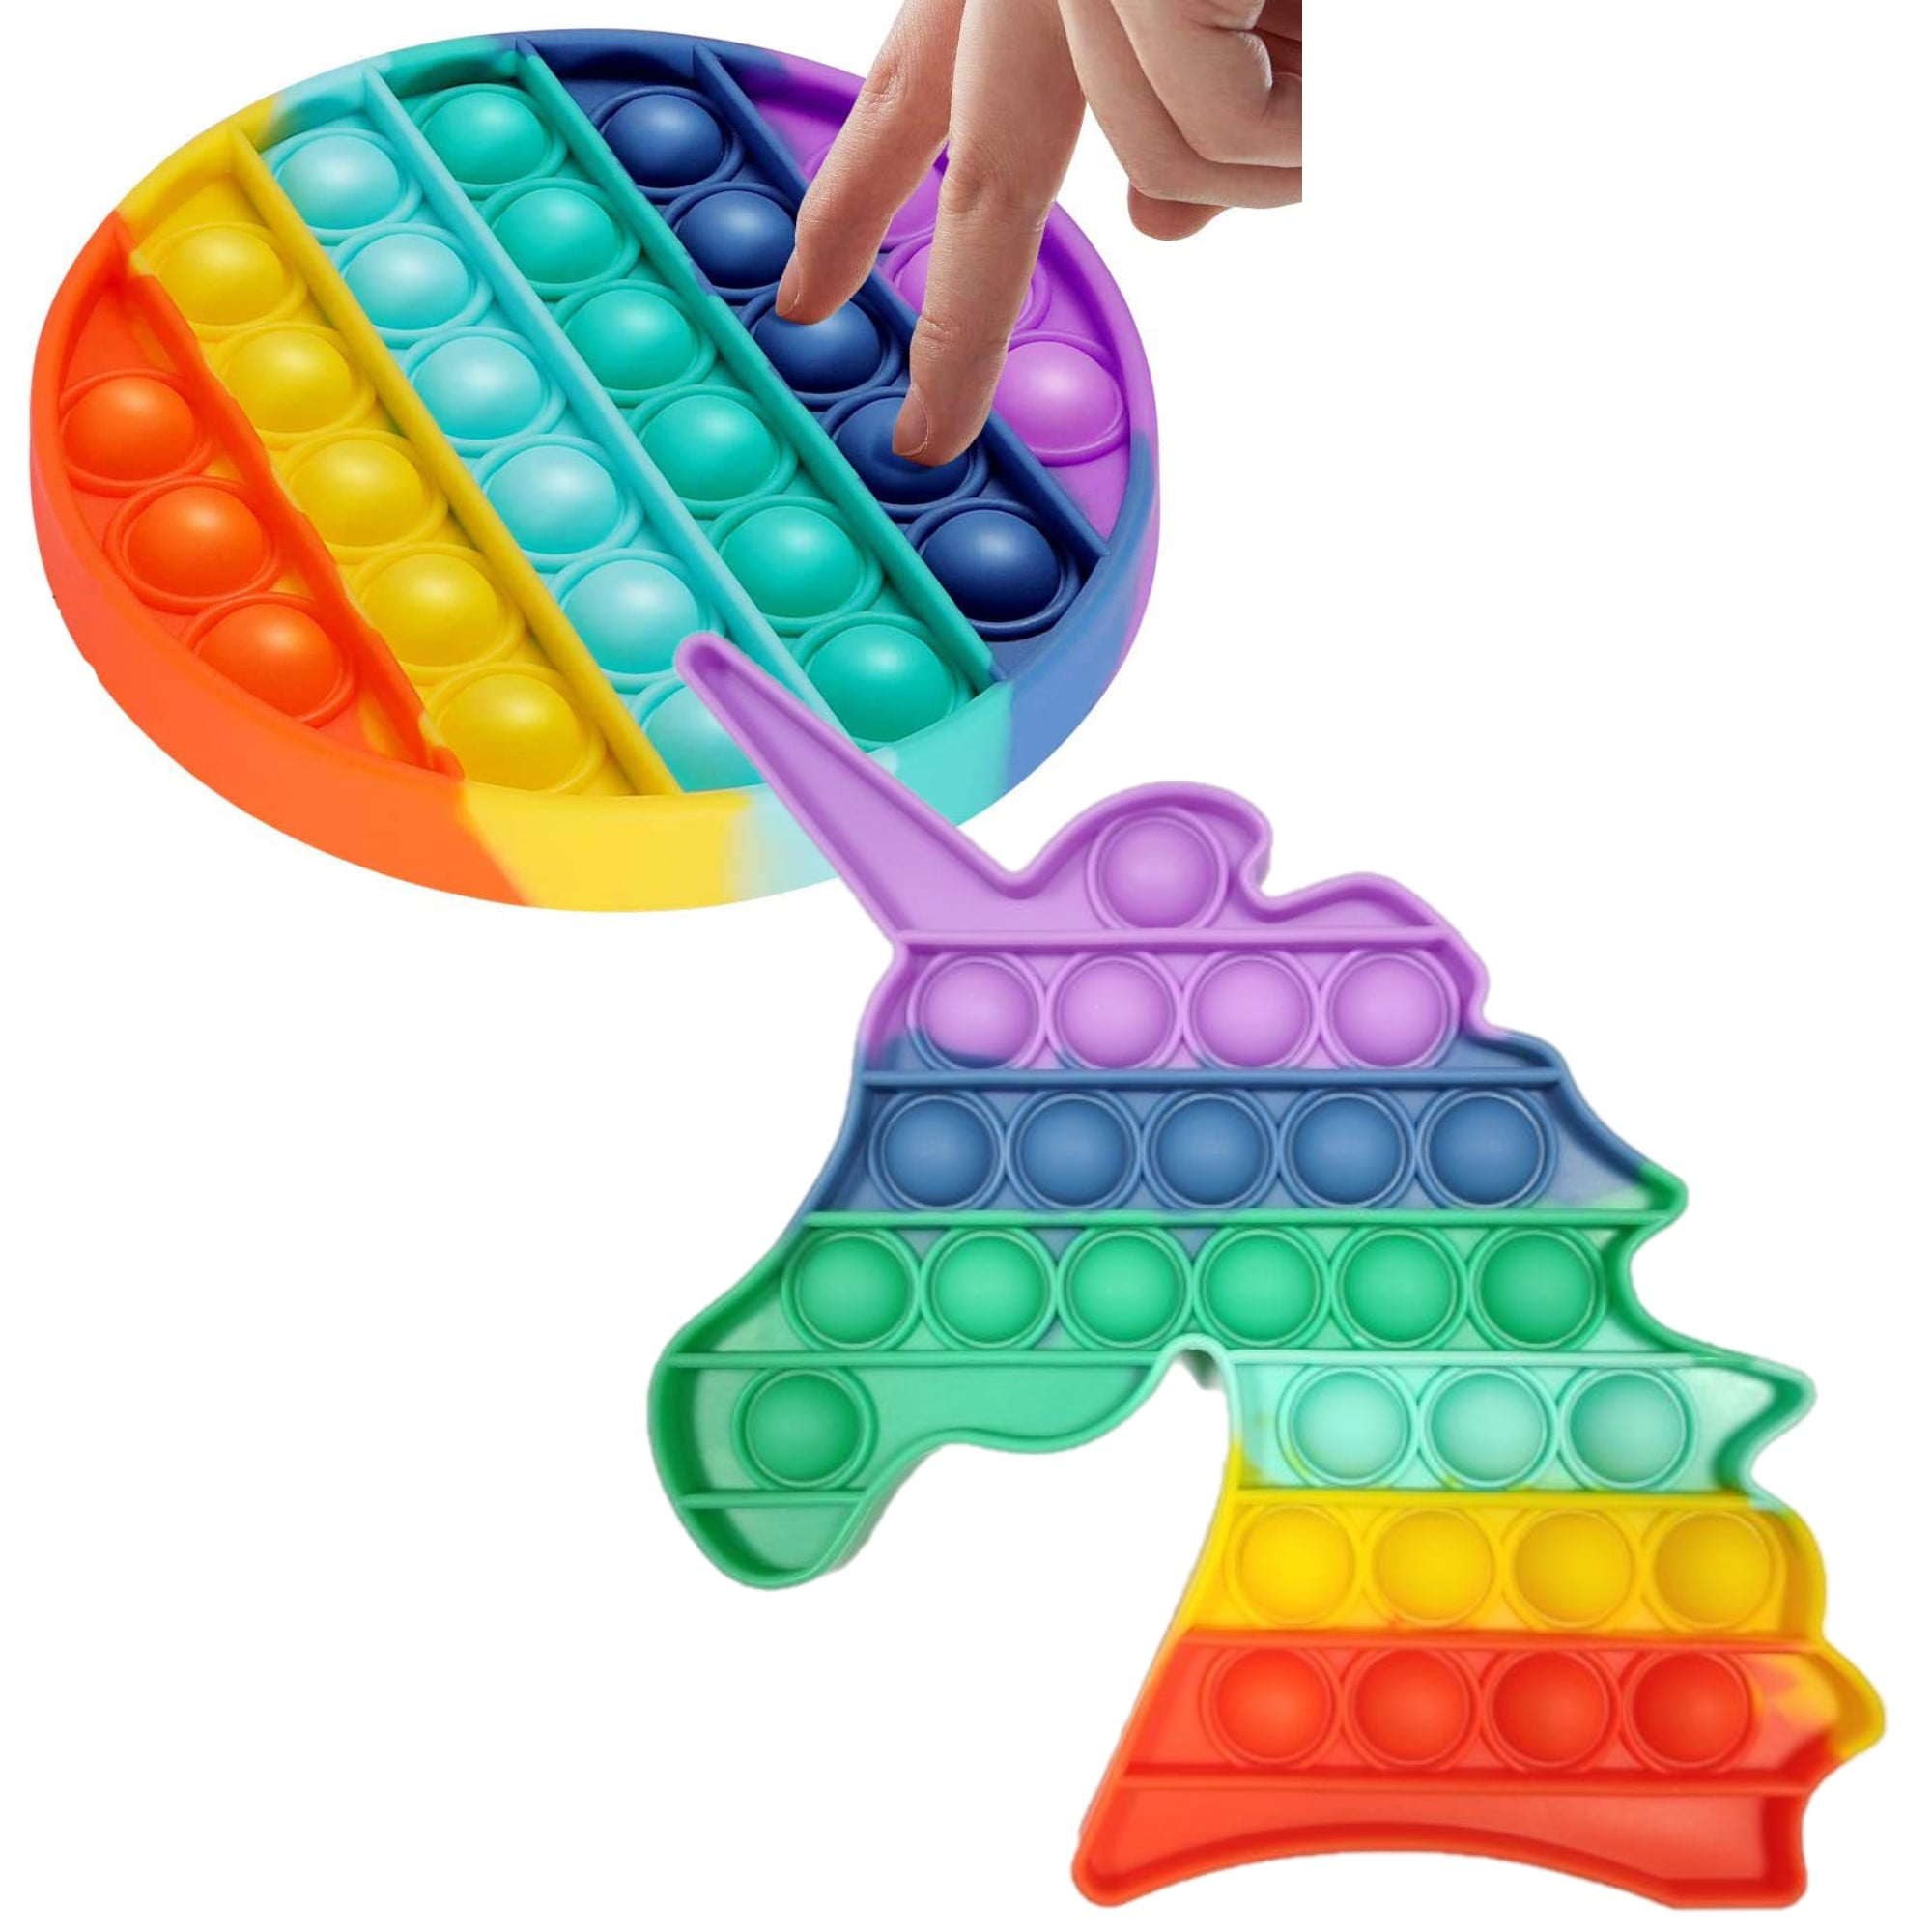 Dinosaur Silicone Squeeze It Fidgets Push Pop Bubble Sensory Fidget Toy Mouse Robot Stress Anxiety Relief Popper Toys for Autism ADHD Special Needs Rainbow Multicolor 4 Pack Set: Unicorn